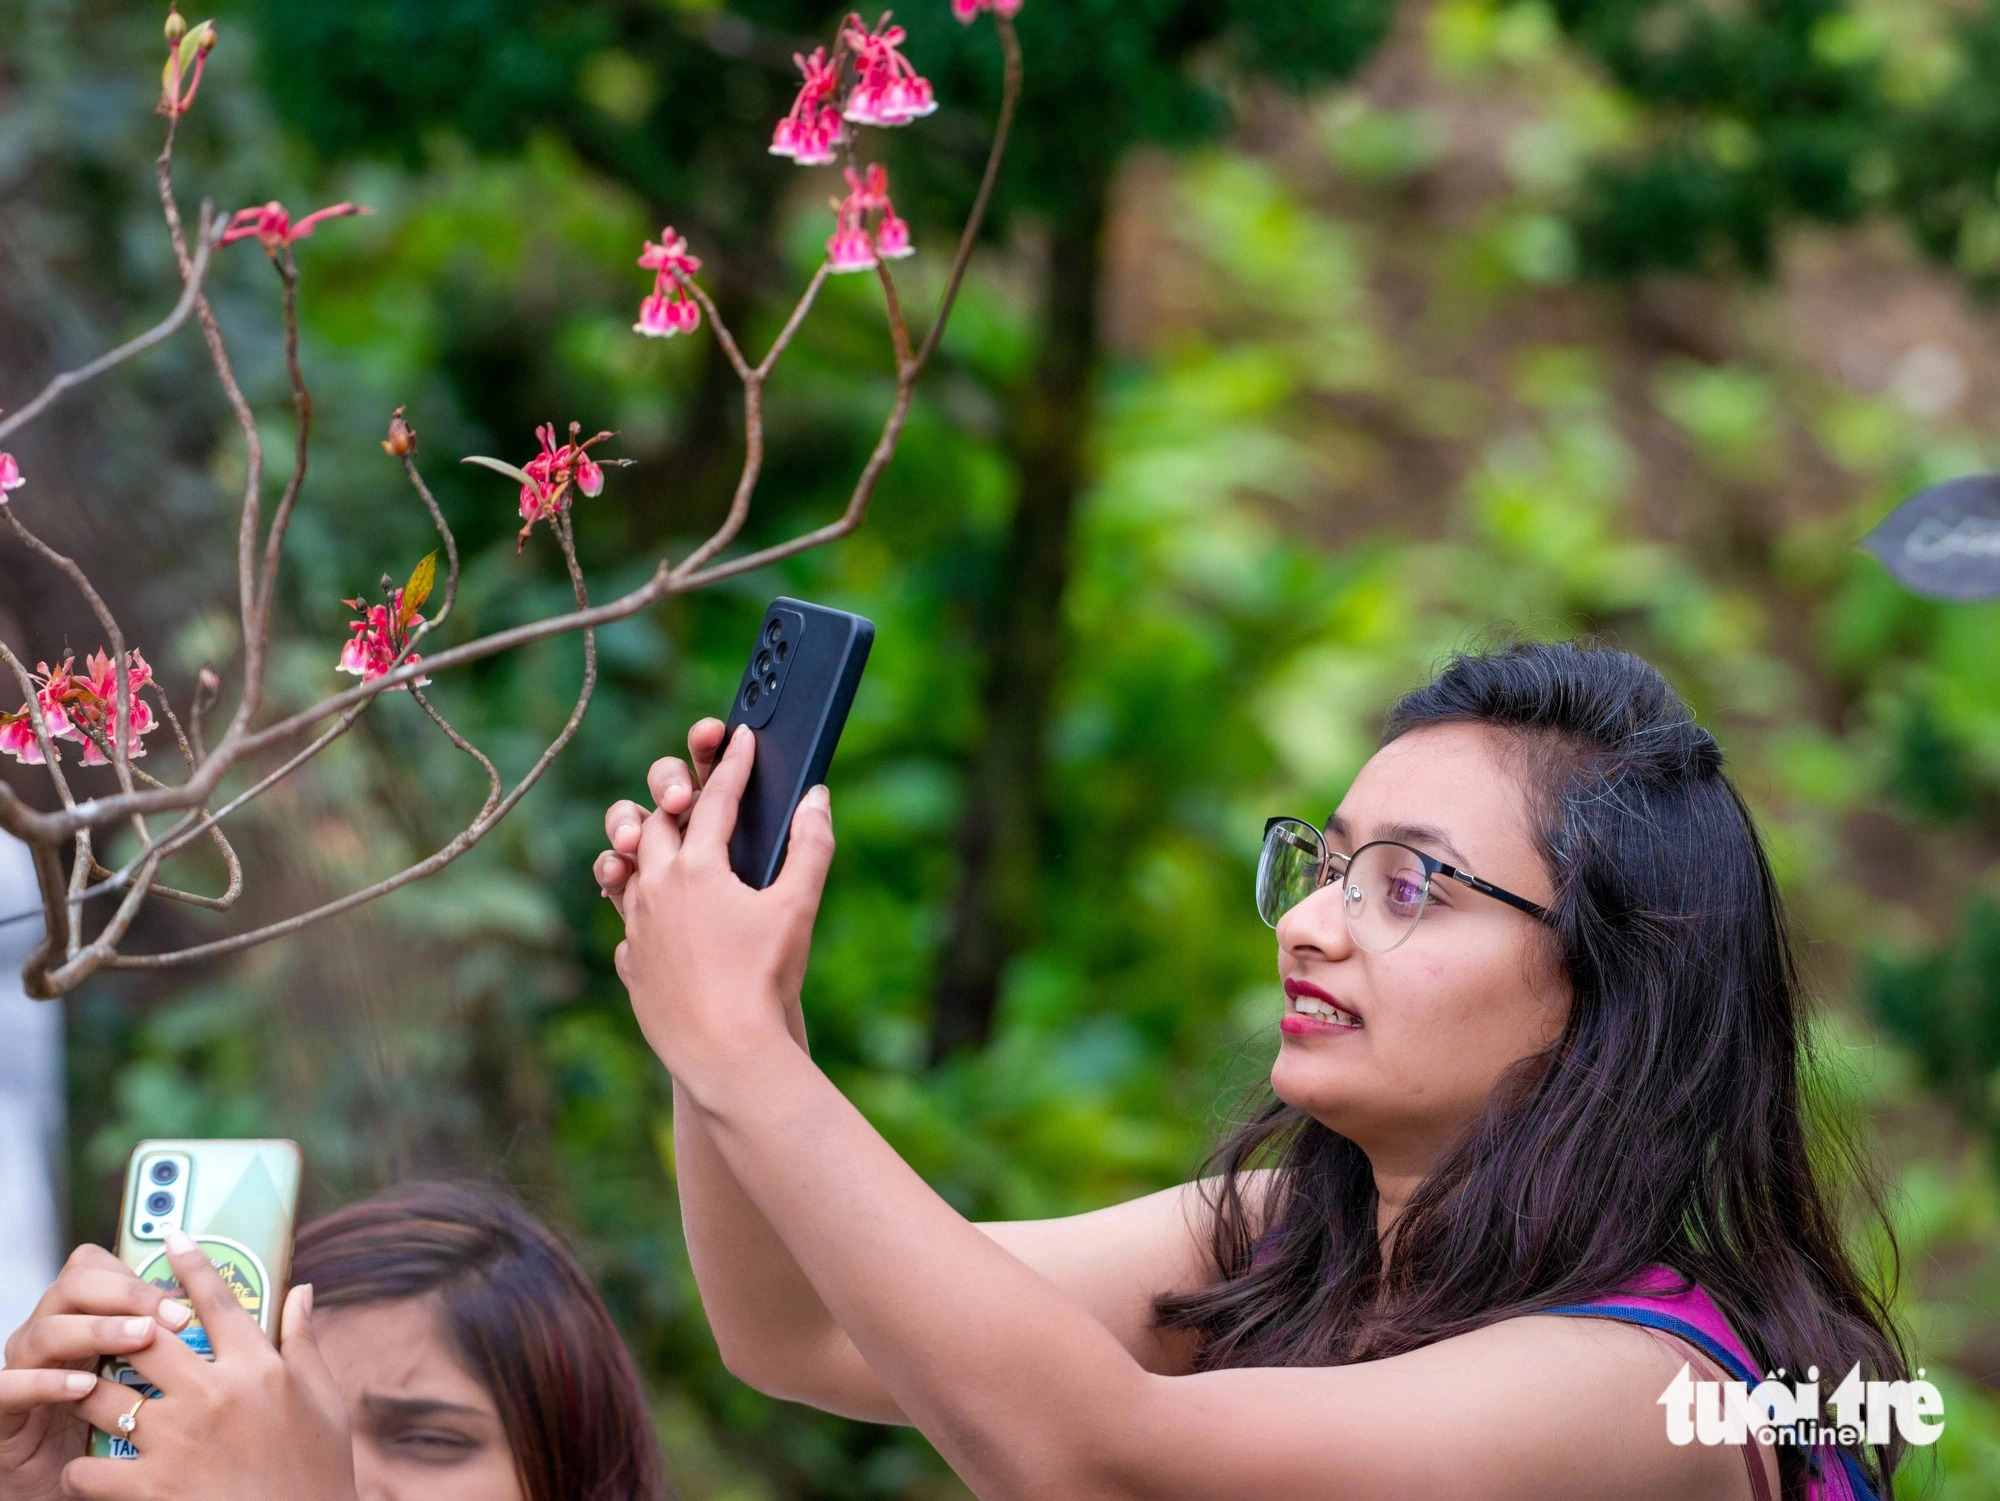 Visitors take photos of bell-shaped peach blossoms at the Sun World Ba Na Hills tourist site in Da Nang City, central Vietnam. Photo: SG / Tuoi Tre